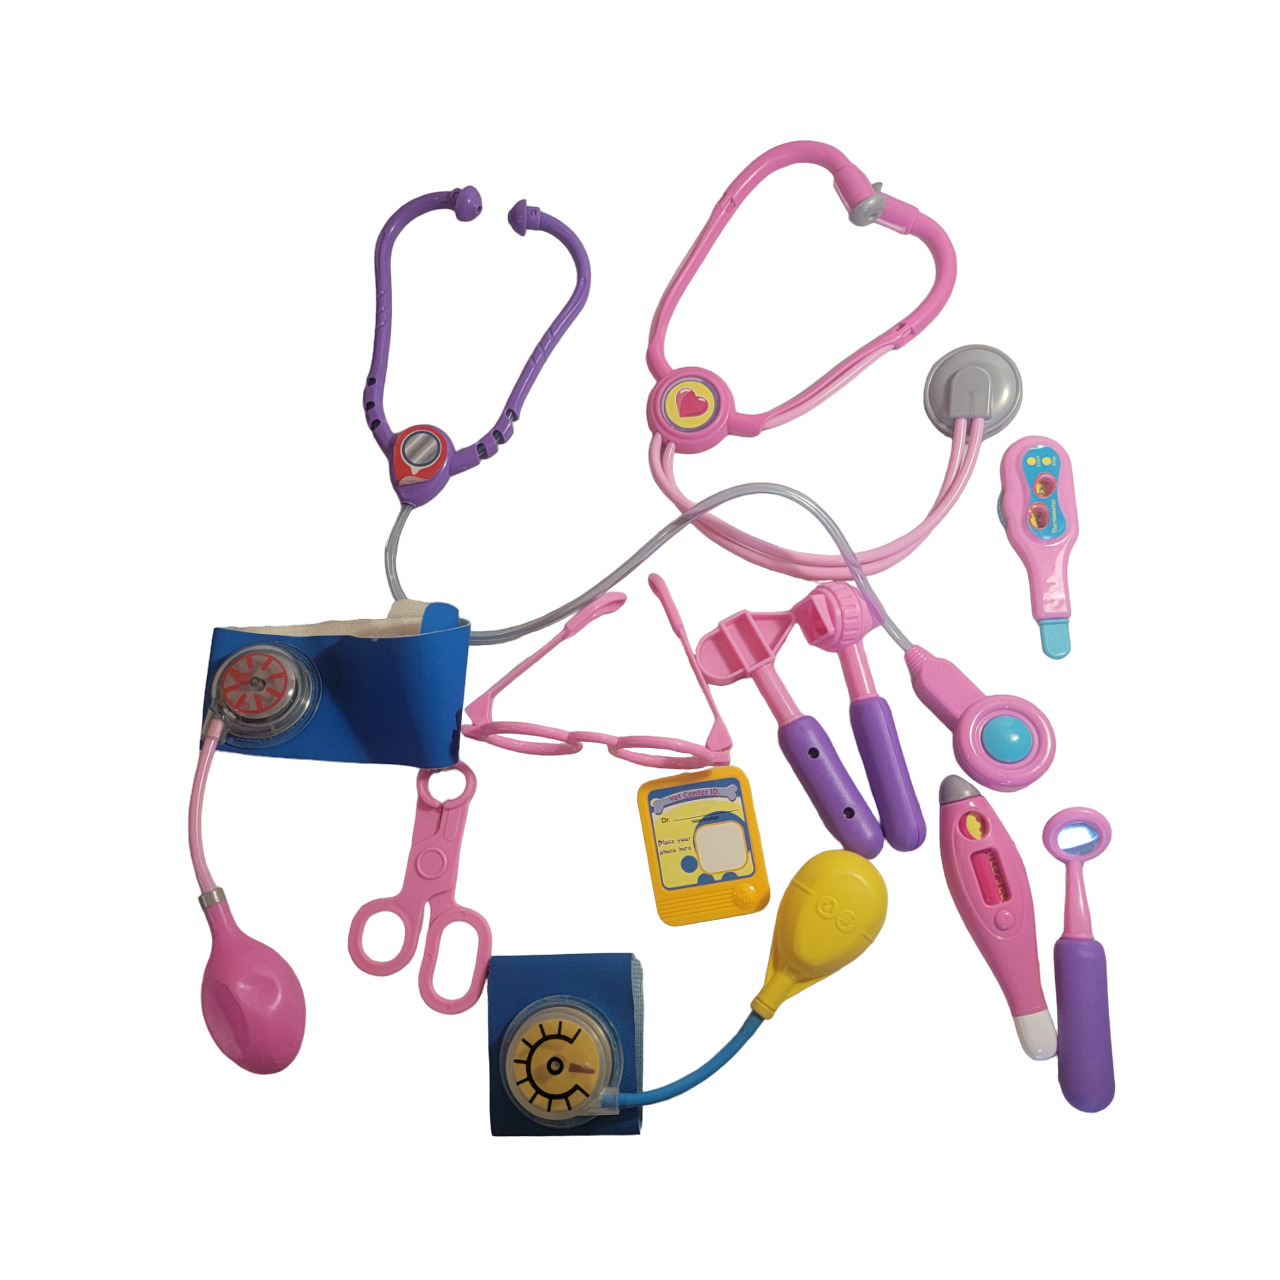 Veterinarian & Doctor Play Accessories 12 Toy Lot- One Stethoscope Makes Sounds